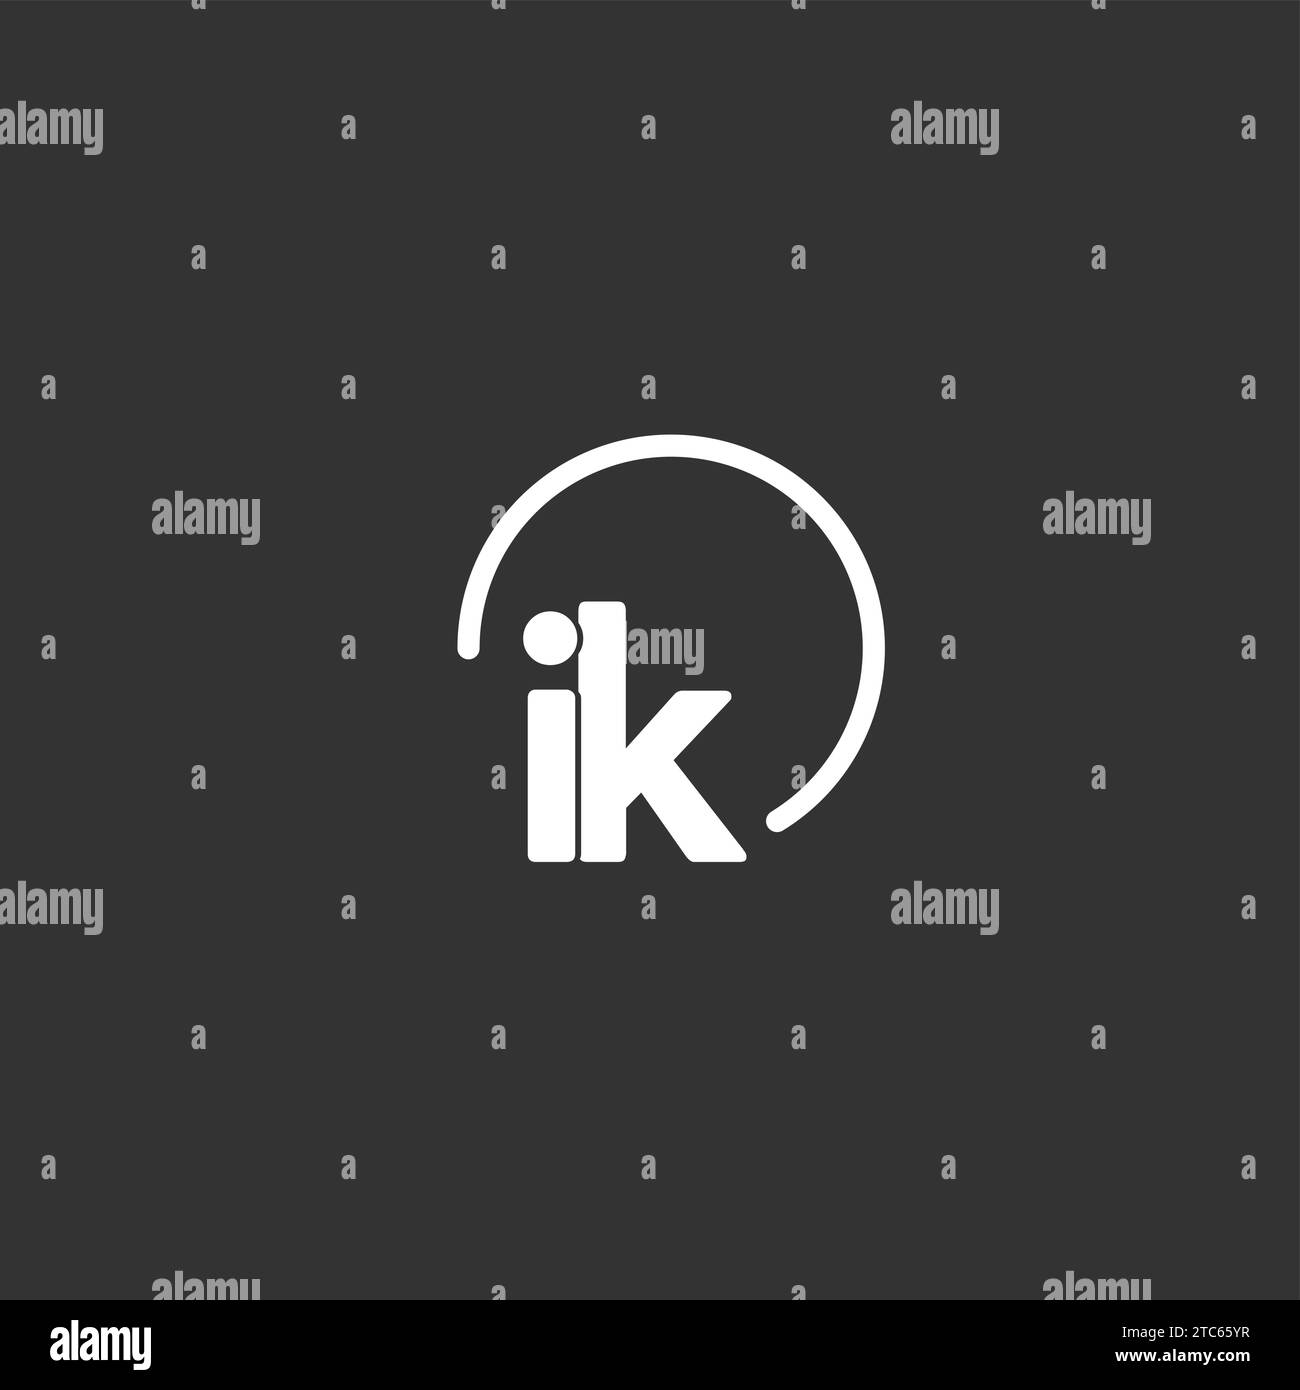 IK initial logo with rounded circle vector graphic Stock Vector